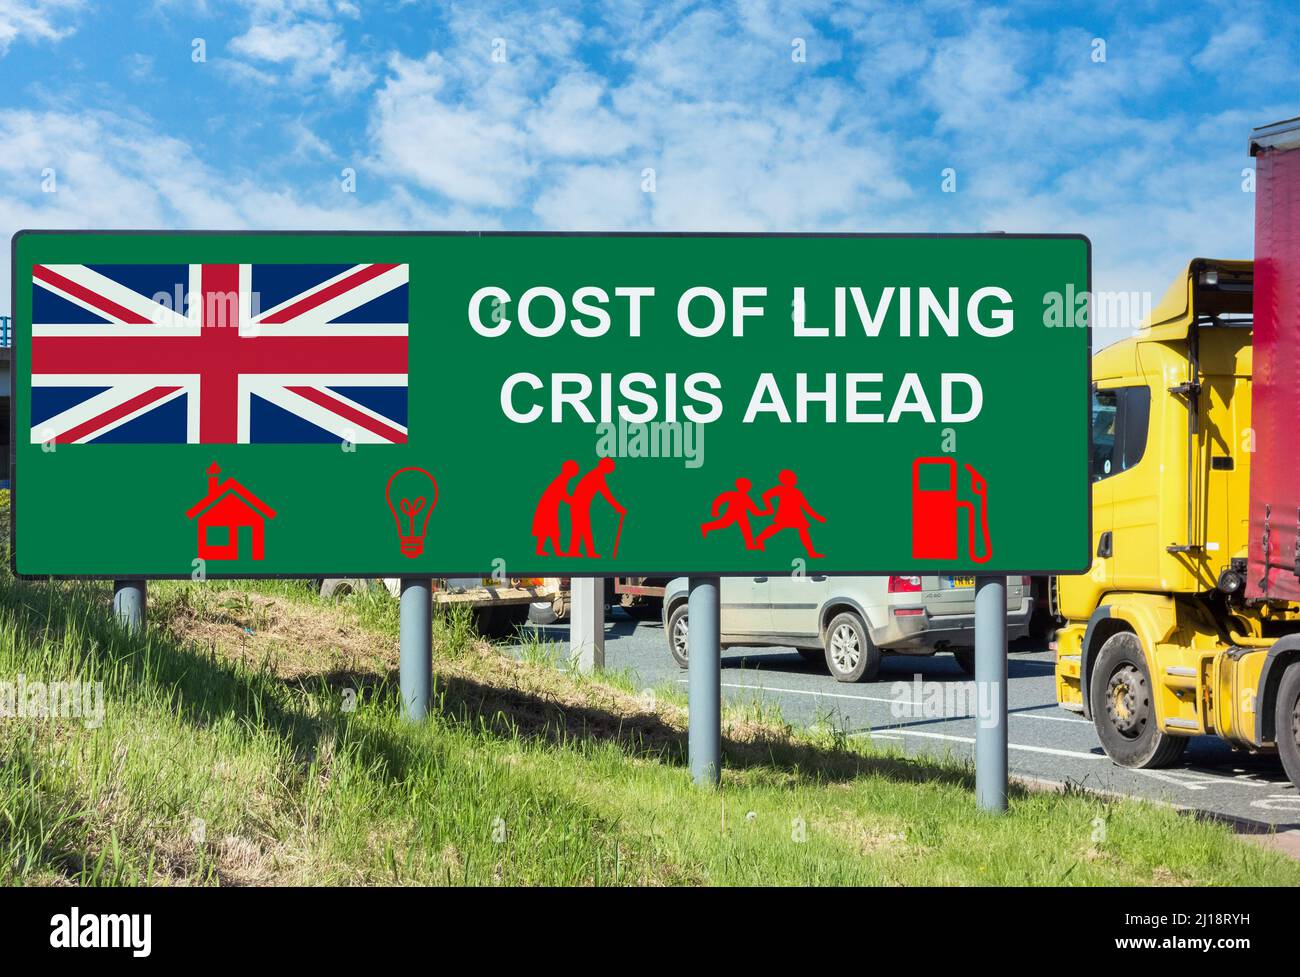 Cost of living crisis, UK budget, rising energy prices, costs, fuel prices, gas, electricity, inflation, uk economy... concept Stock Photo